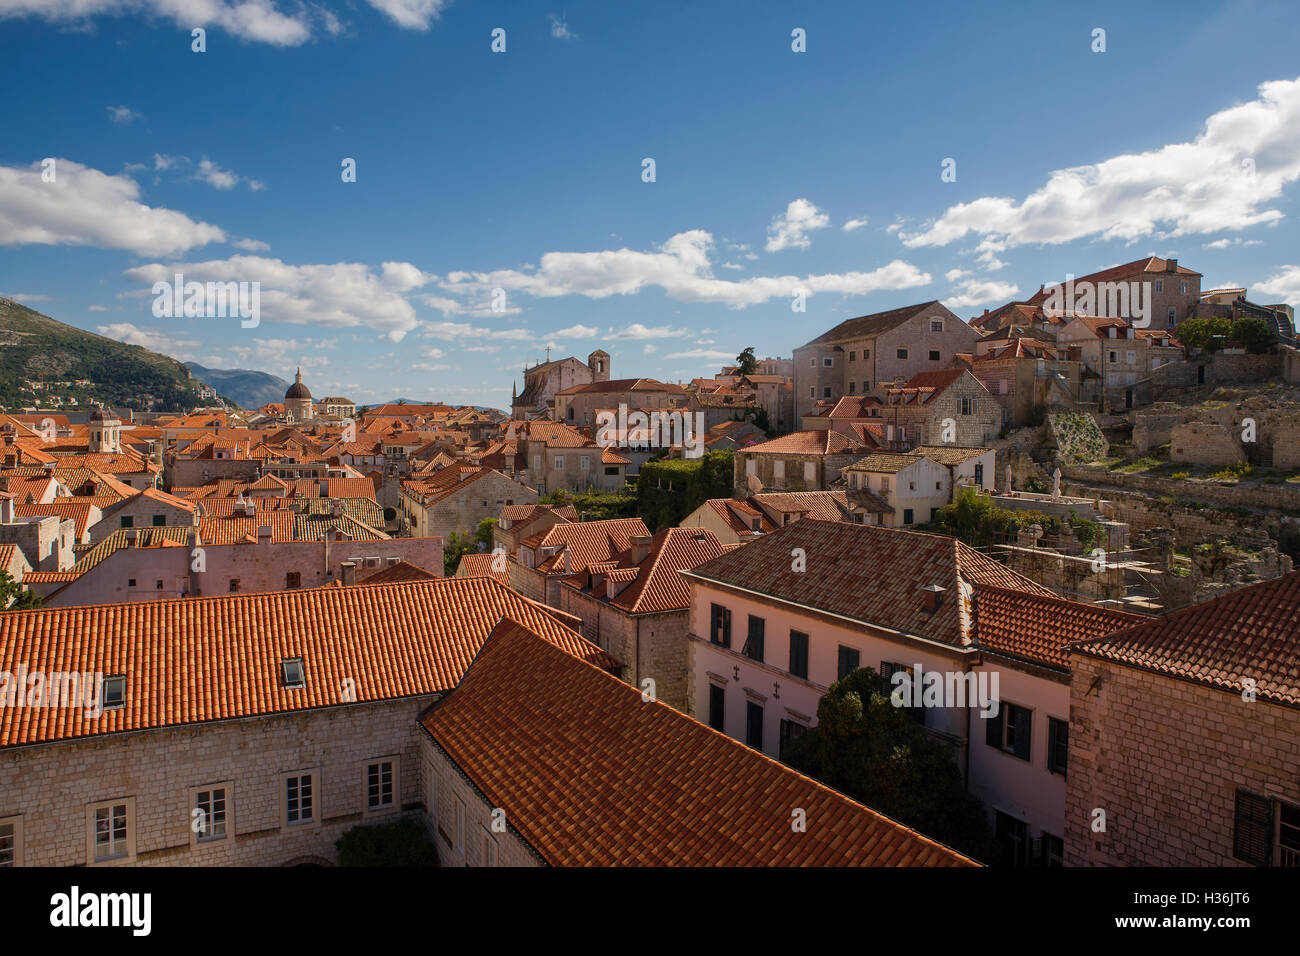 The roofs of old town (stari grad), from the city walls above St. Claire's Convent, Dubrovnik, Croatia Stock Photo